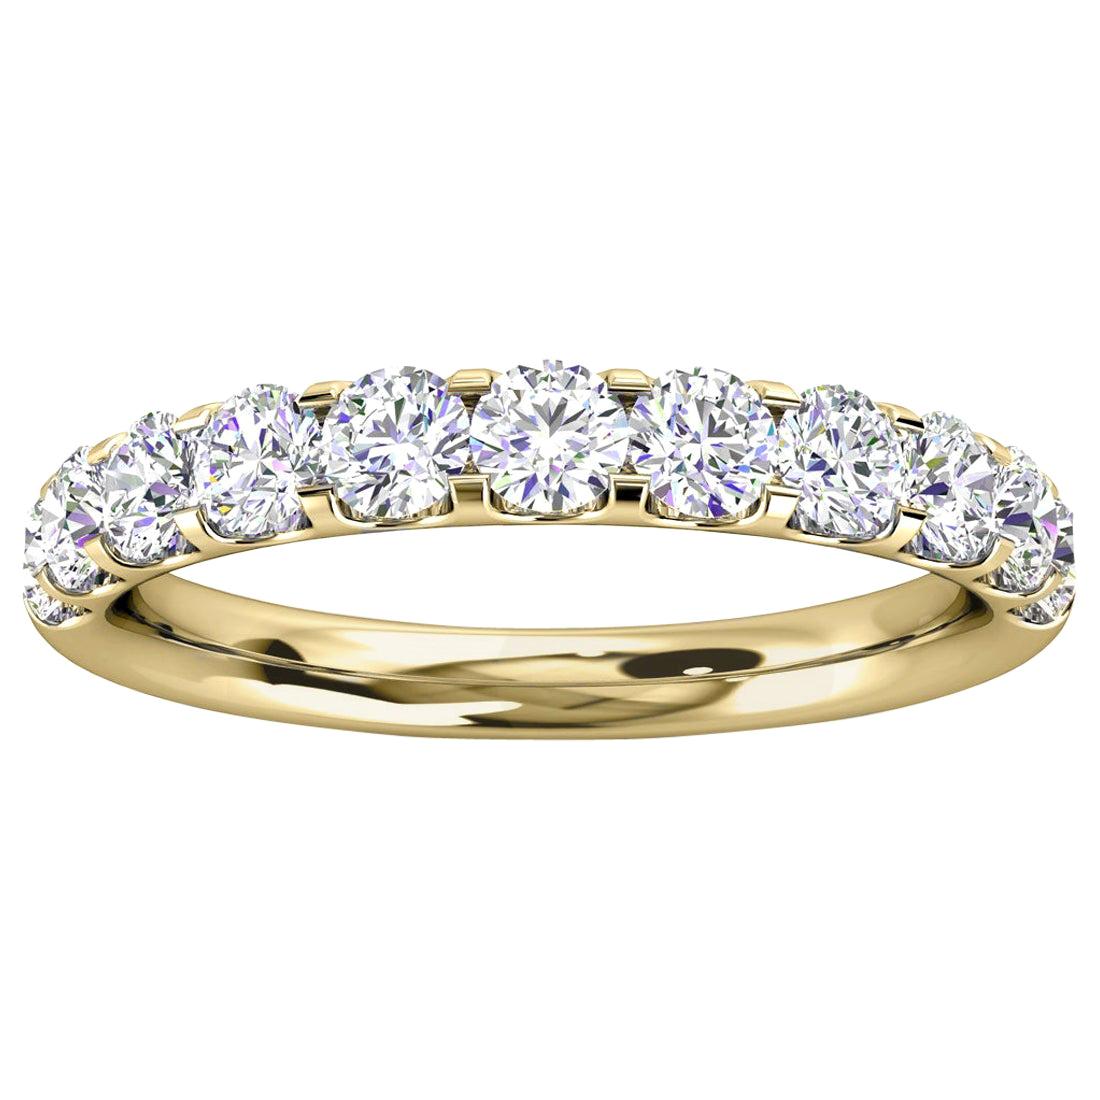 For Sale:  18K Yellow Gold Valerie Micro-Prong Diamond Ring '3/4 Ct. Tw'